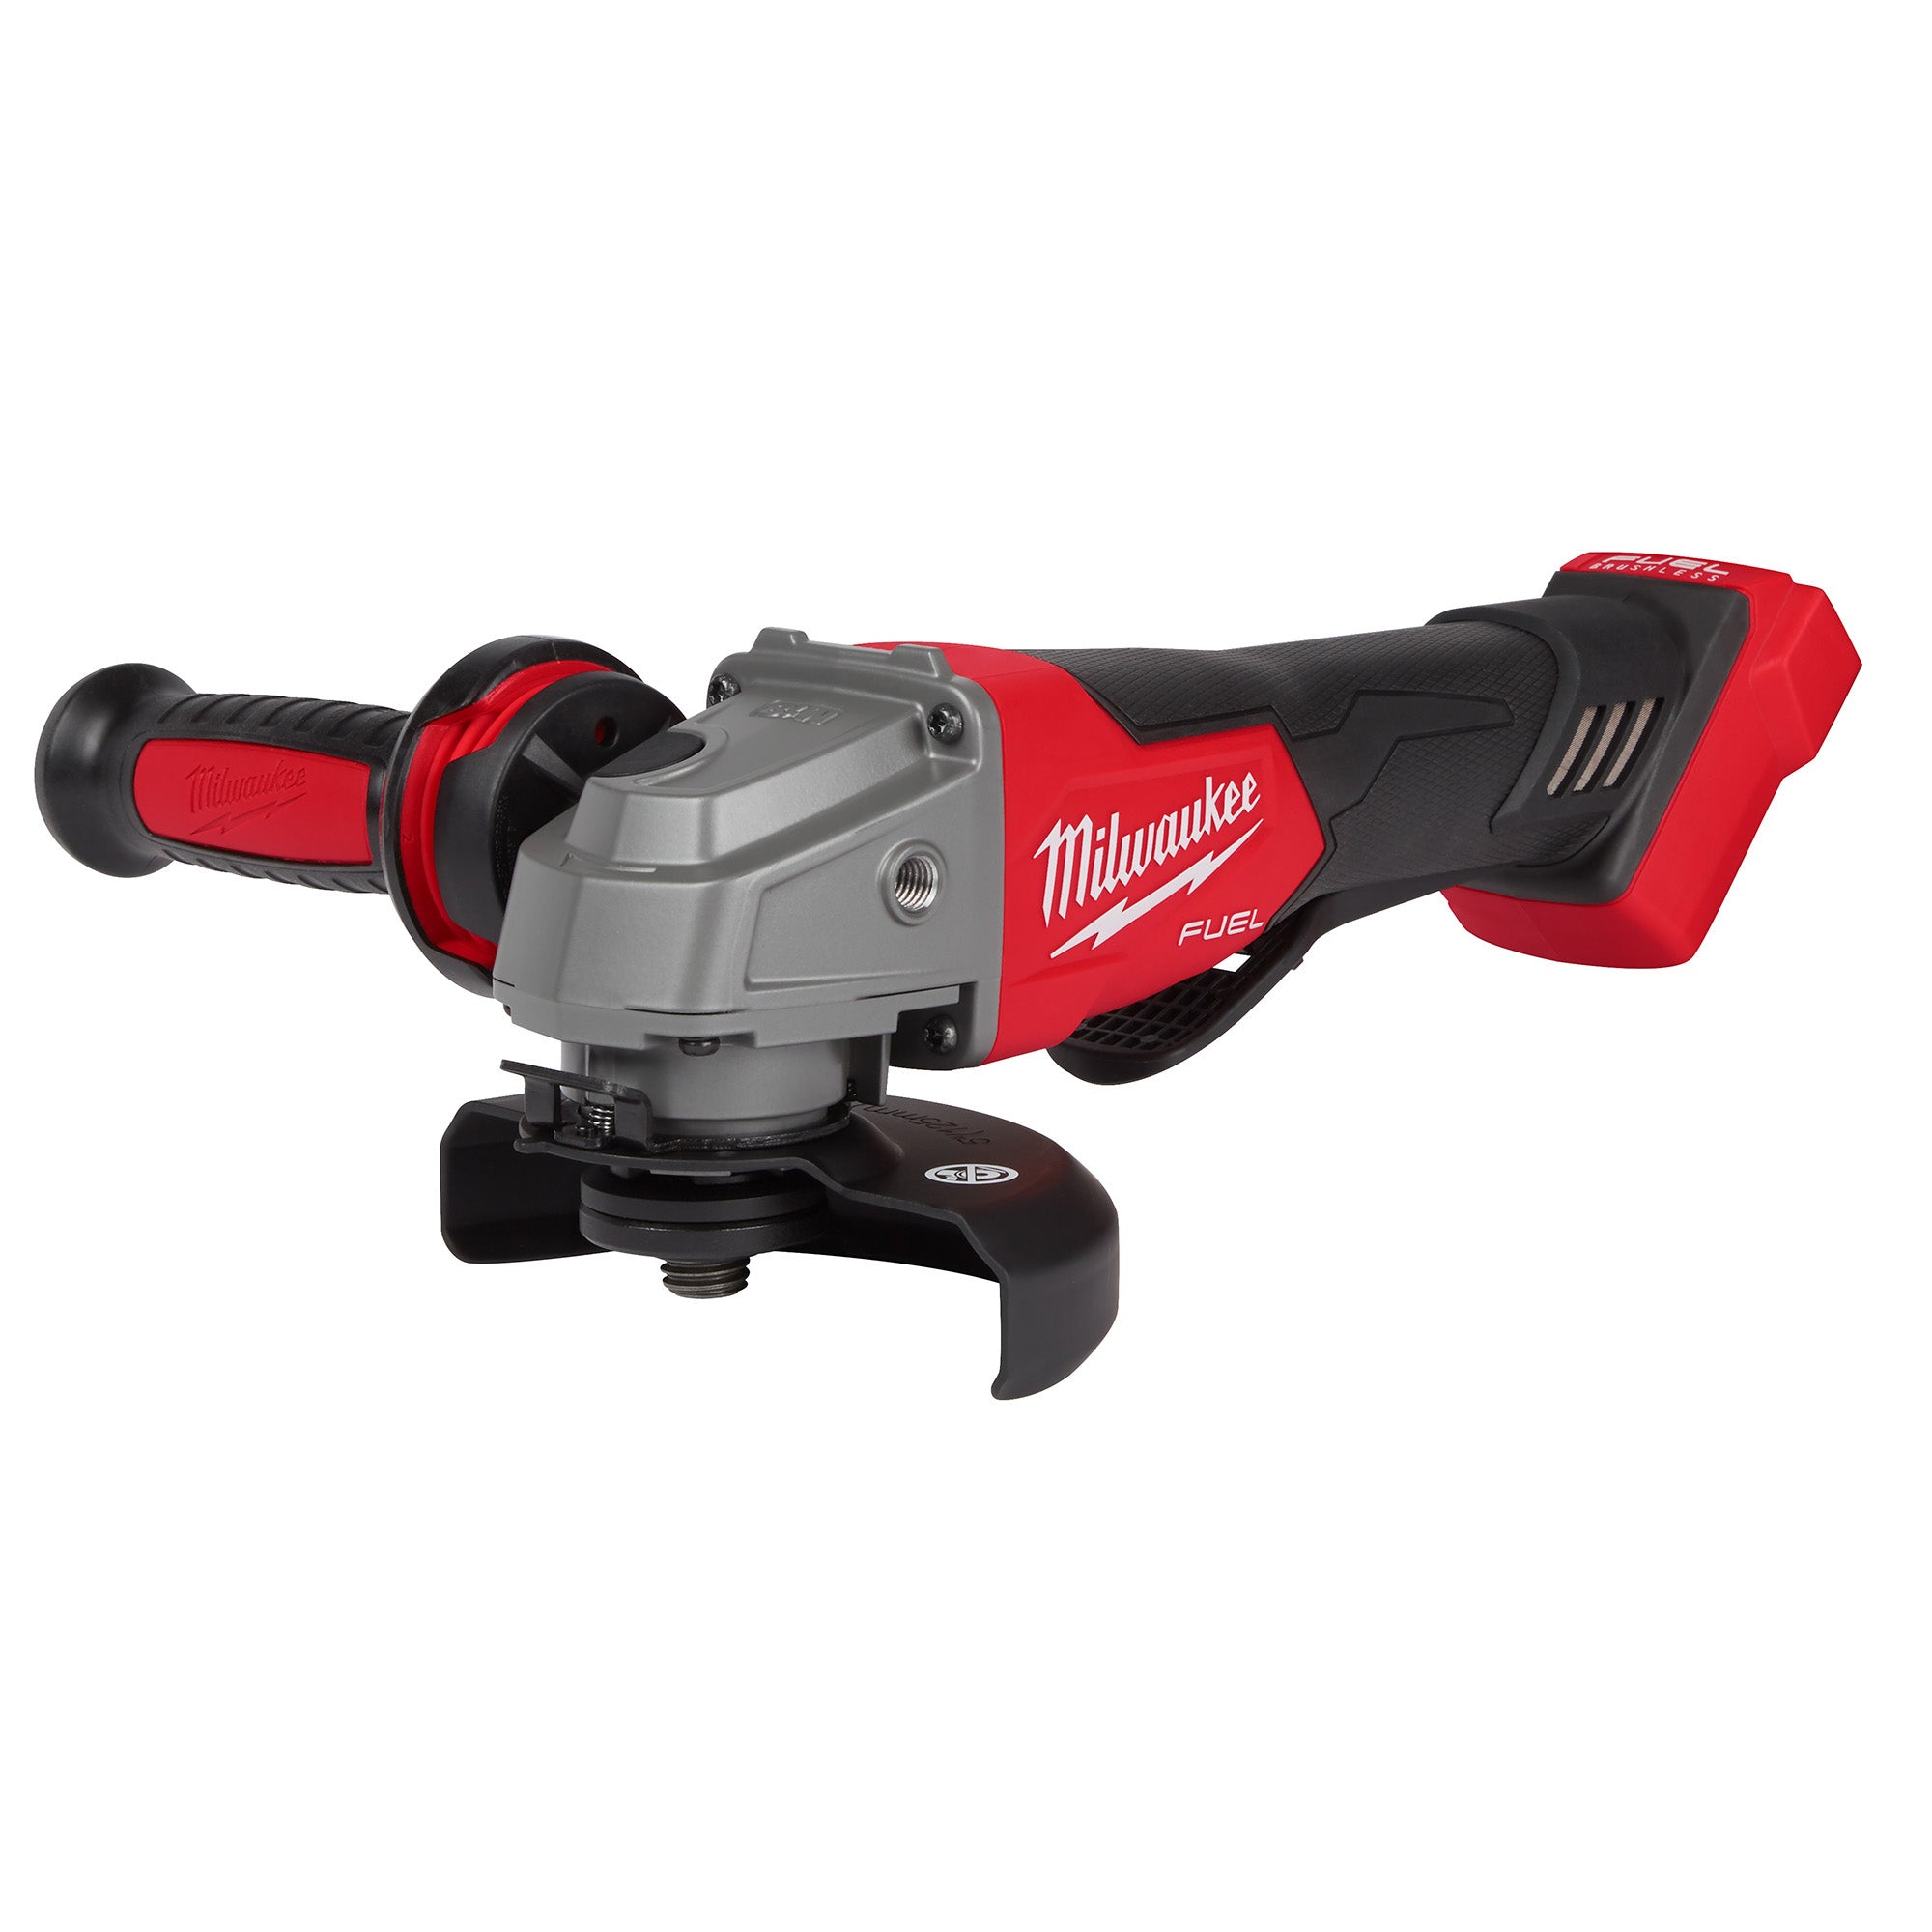 18V M18 FUEL Lithium-Ion Brushless Cordless 4-1/2" / 5" Grinder Paddle Switch, No-Lock (Tool Only)